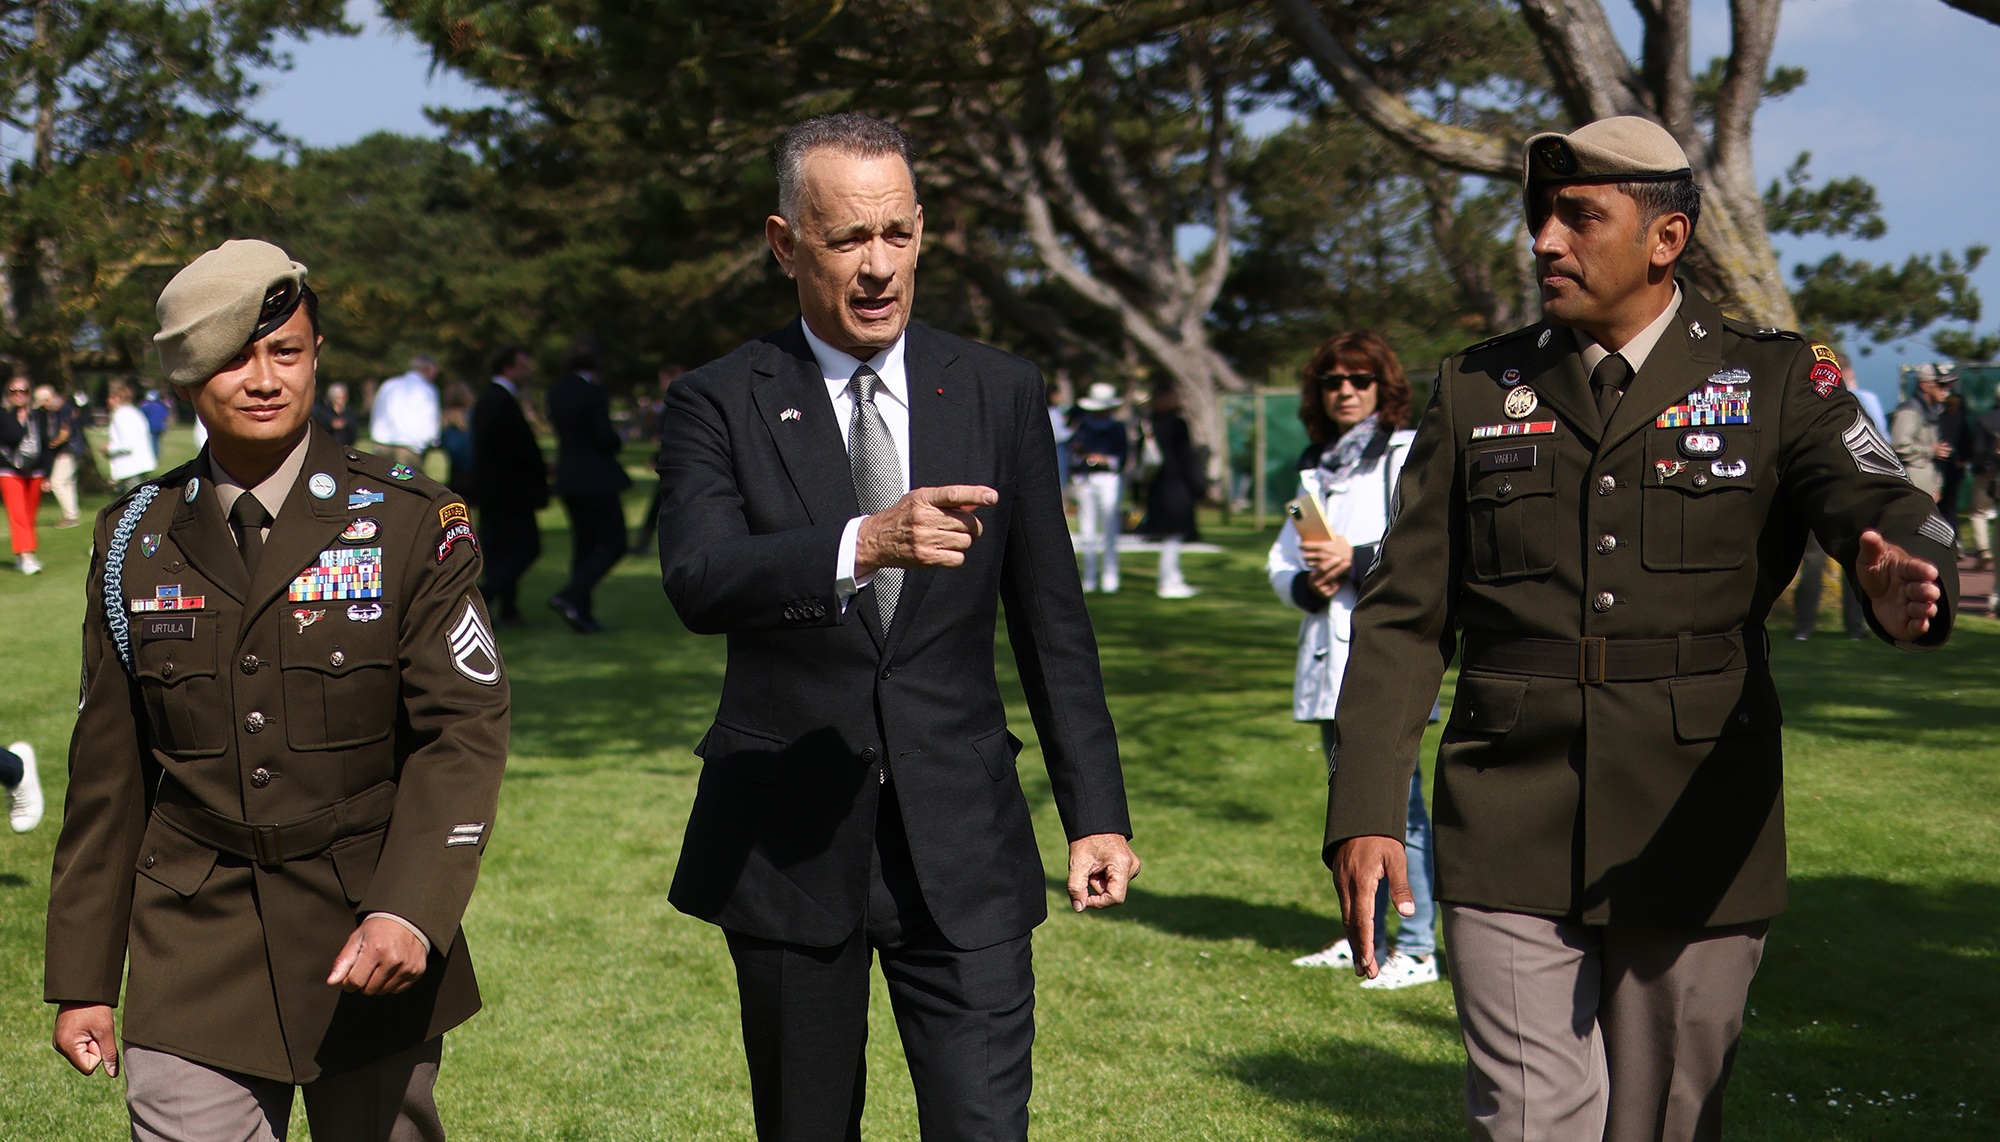 Tom Hanks during a walk about at the Normandy American Cemetery ahead to the US ceremony marking the 80th Anniversary of D-Day at Normandy American Cemetery, Colleville-sur-Mer, France, on June 6.